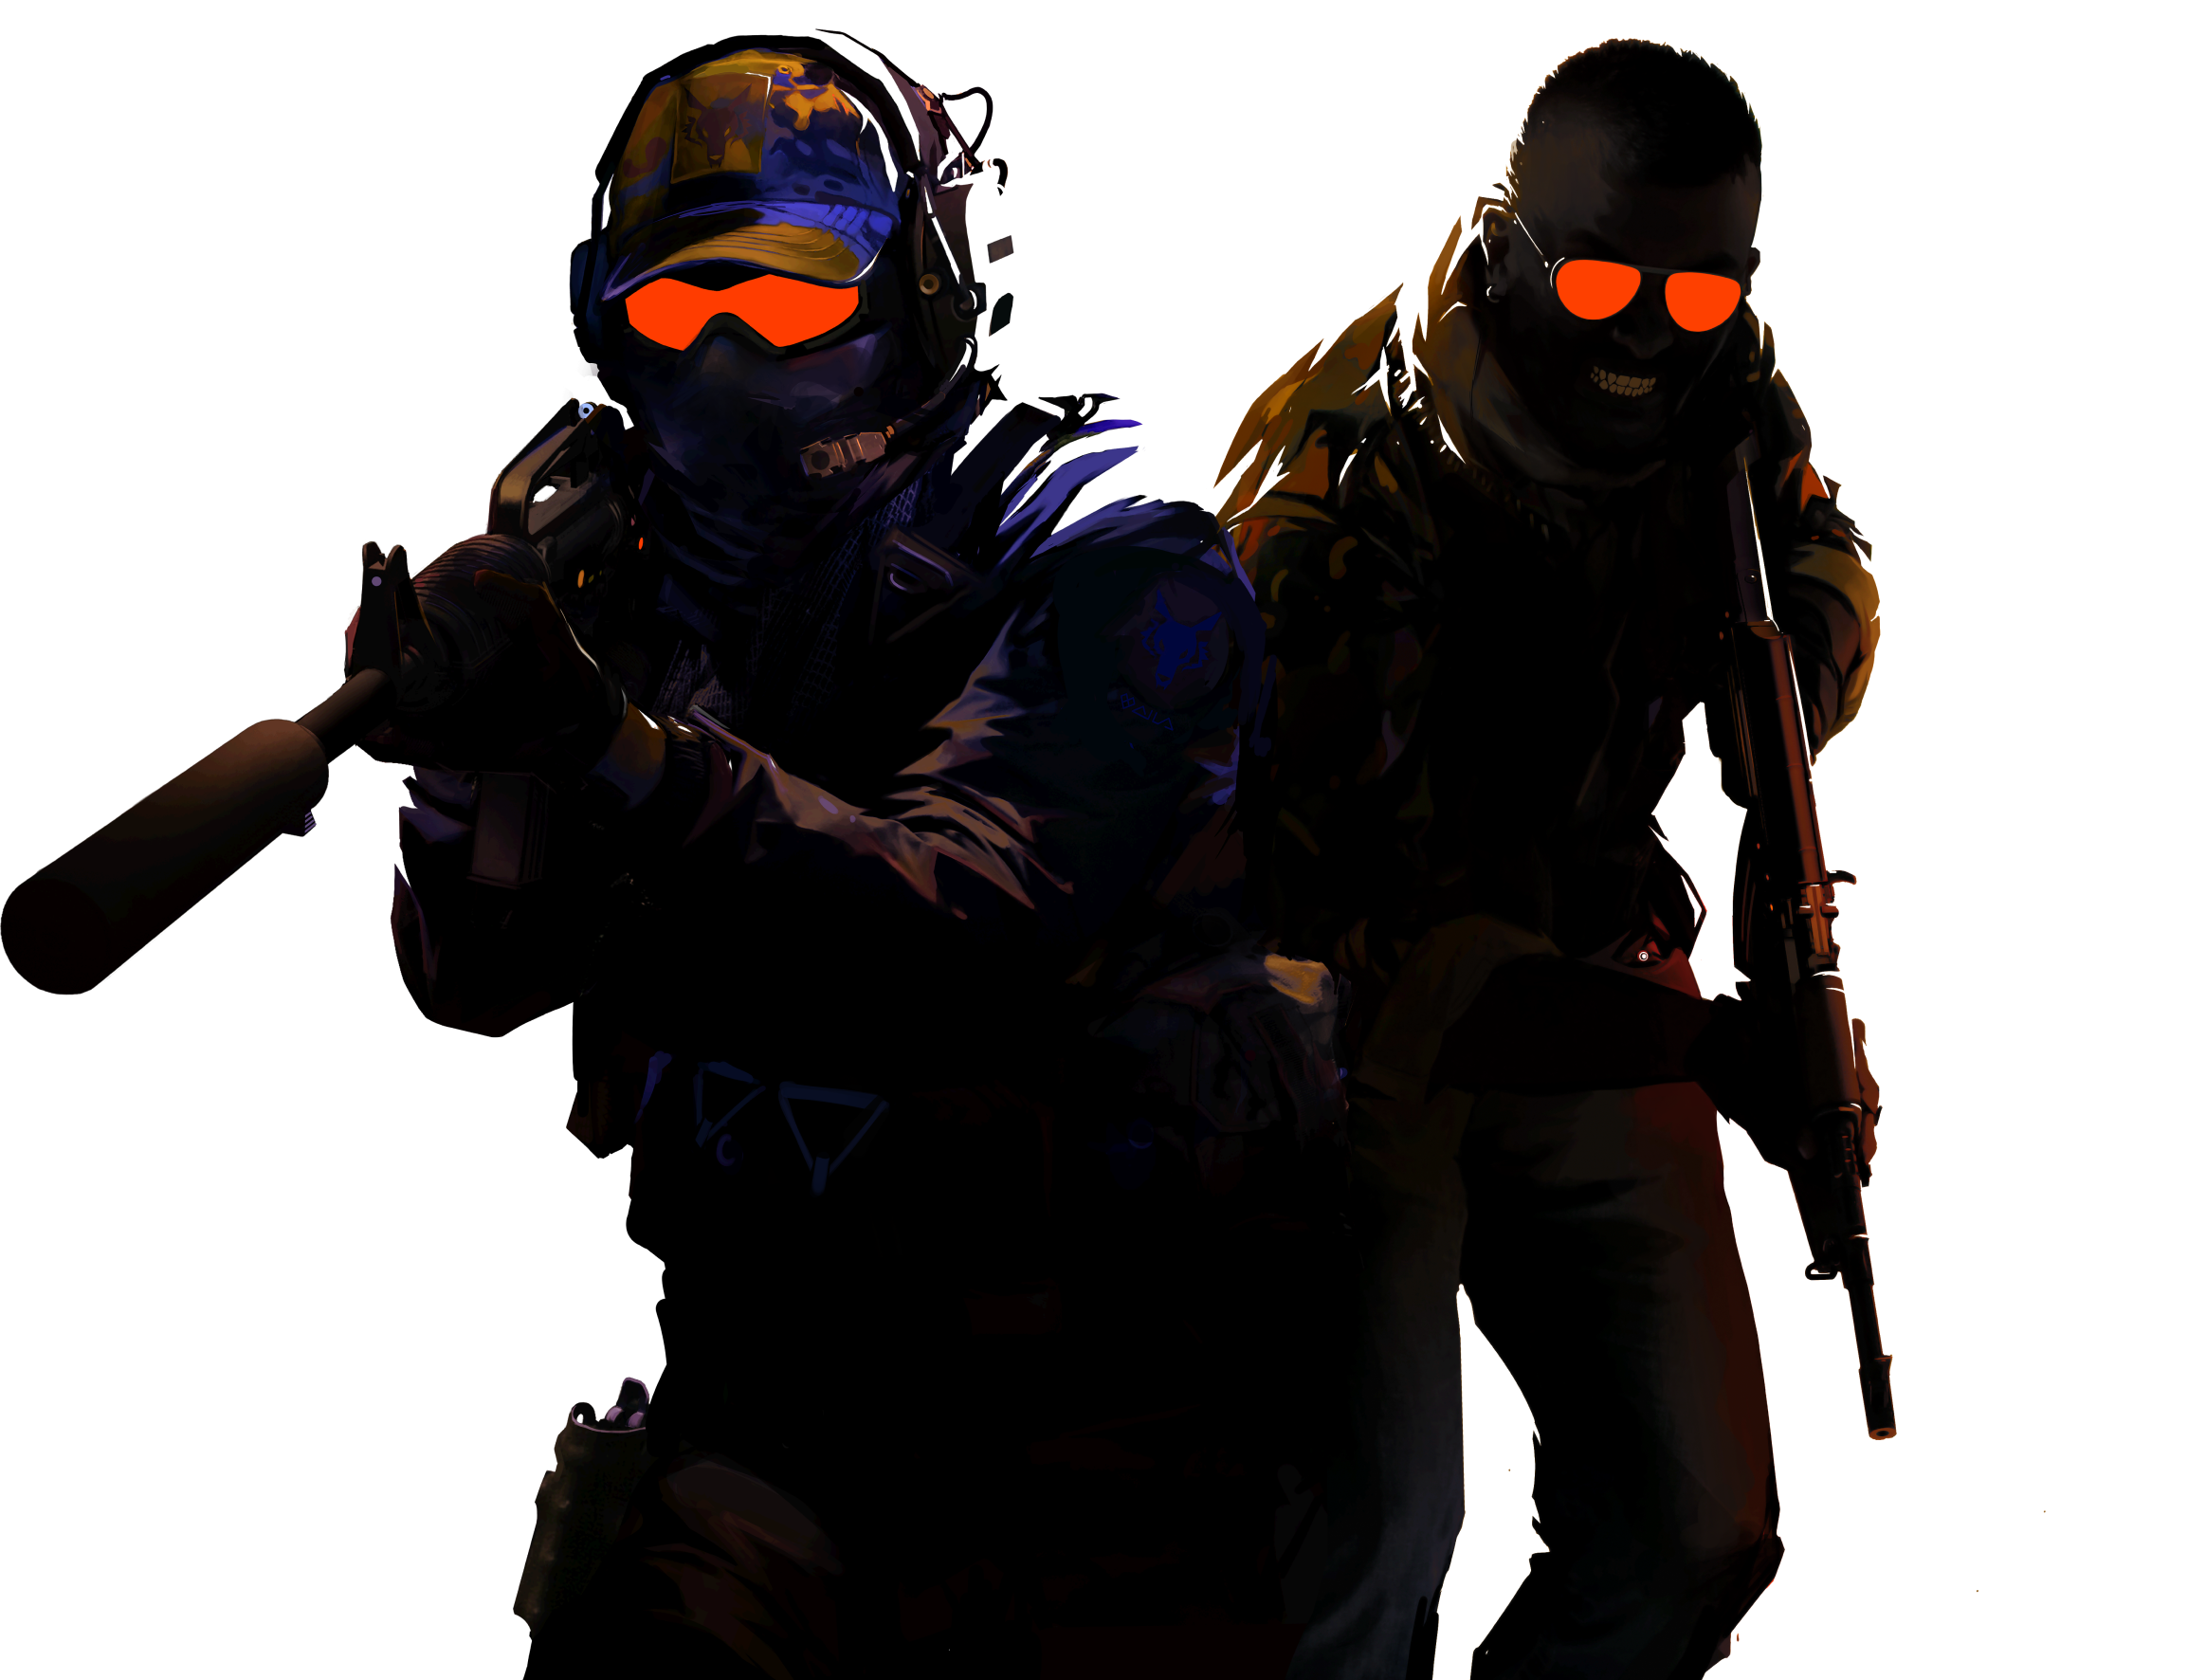 CS2 game depiction of an alliance between a Counter-Terrorist and a Terrorist, both equipped and masked, symbolizing Nexus Play's unique gaming experience.